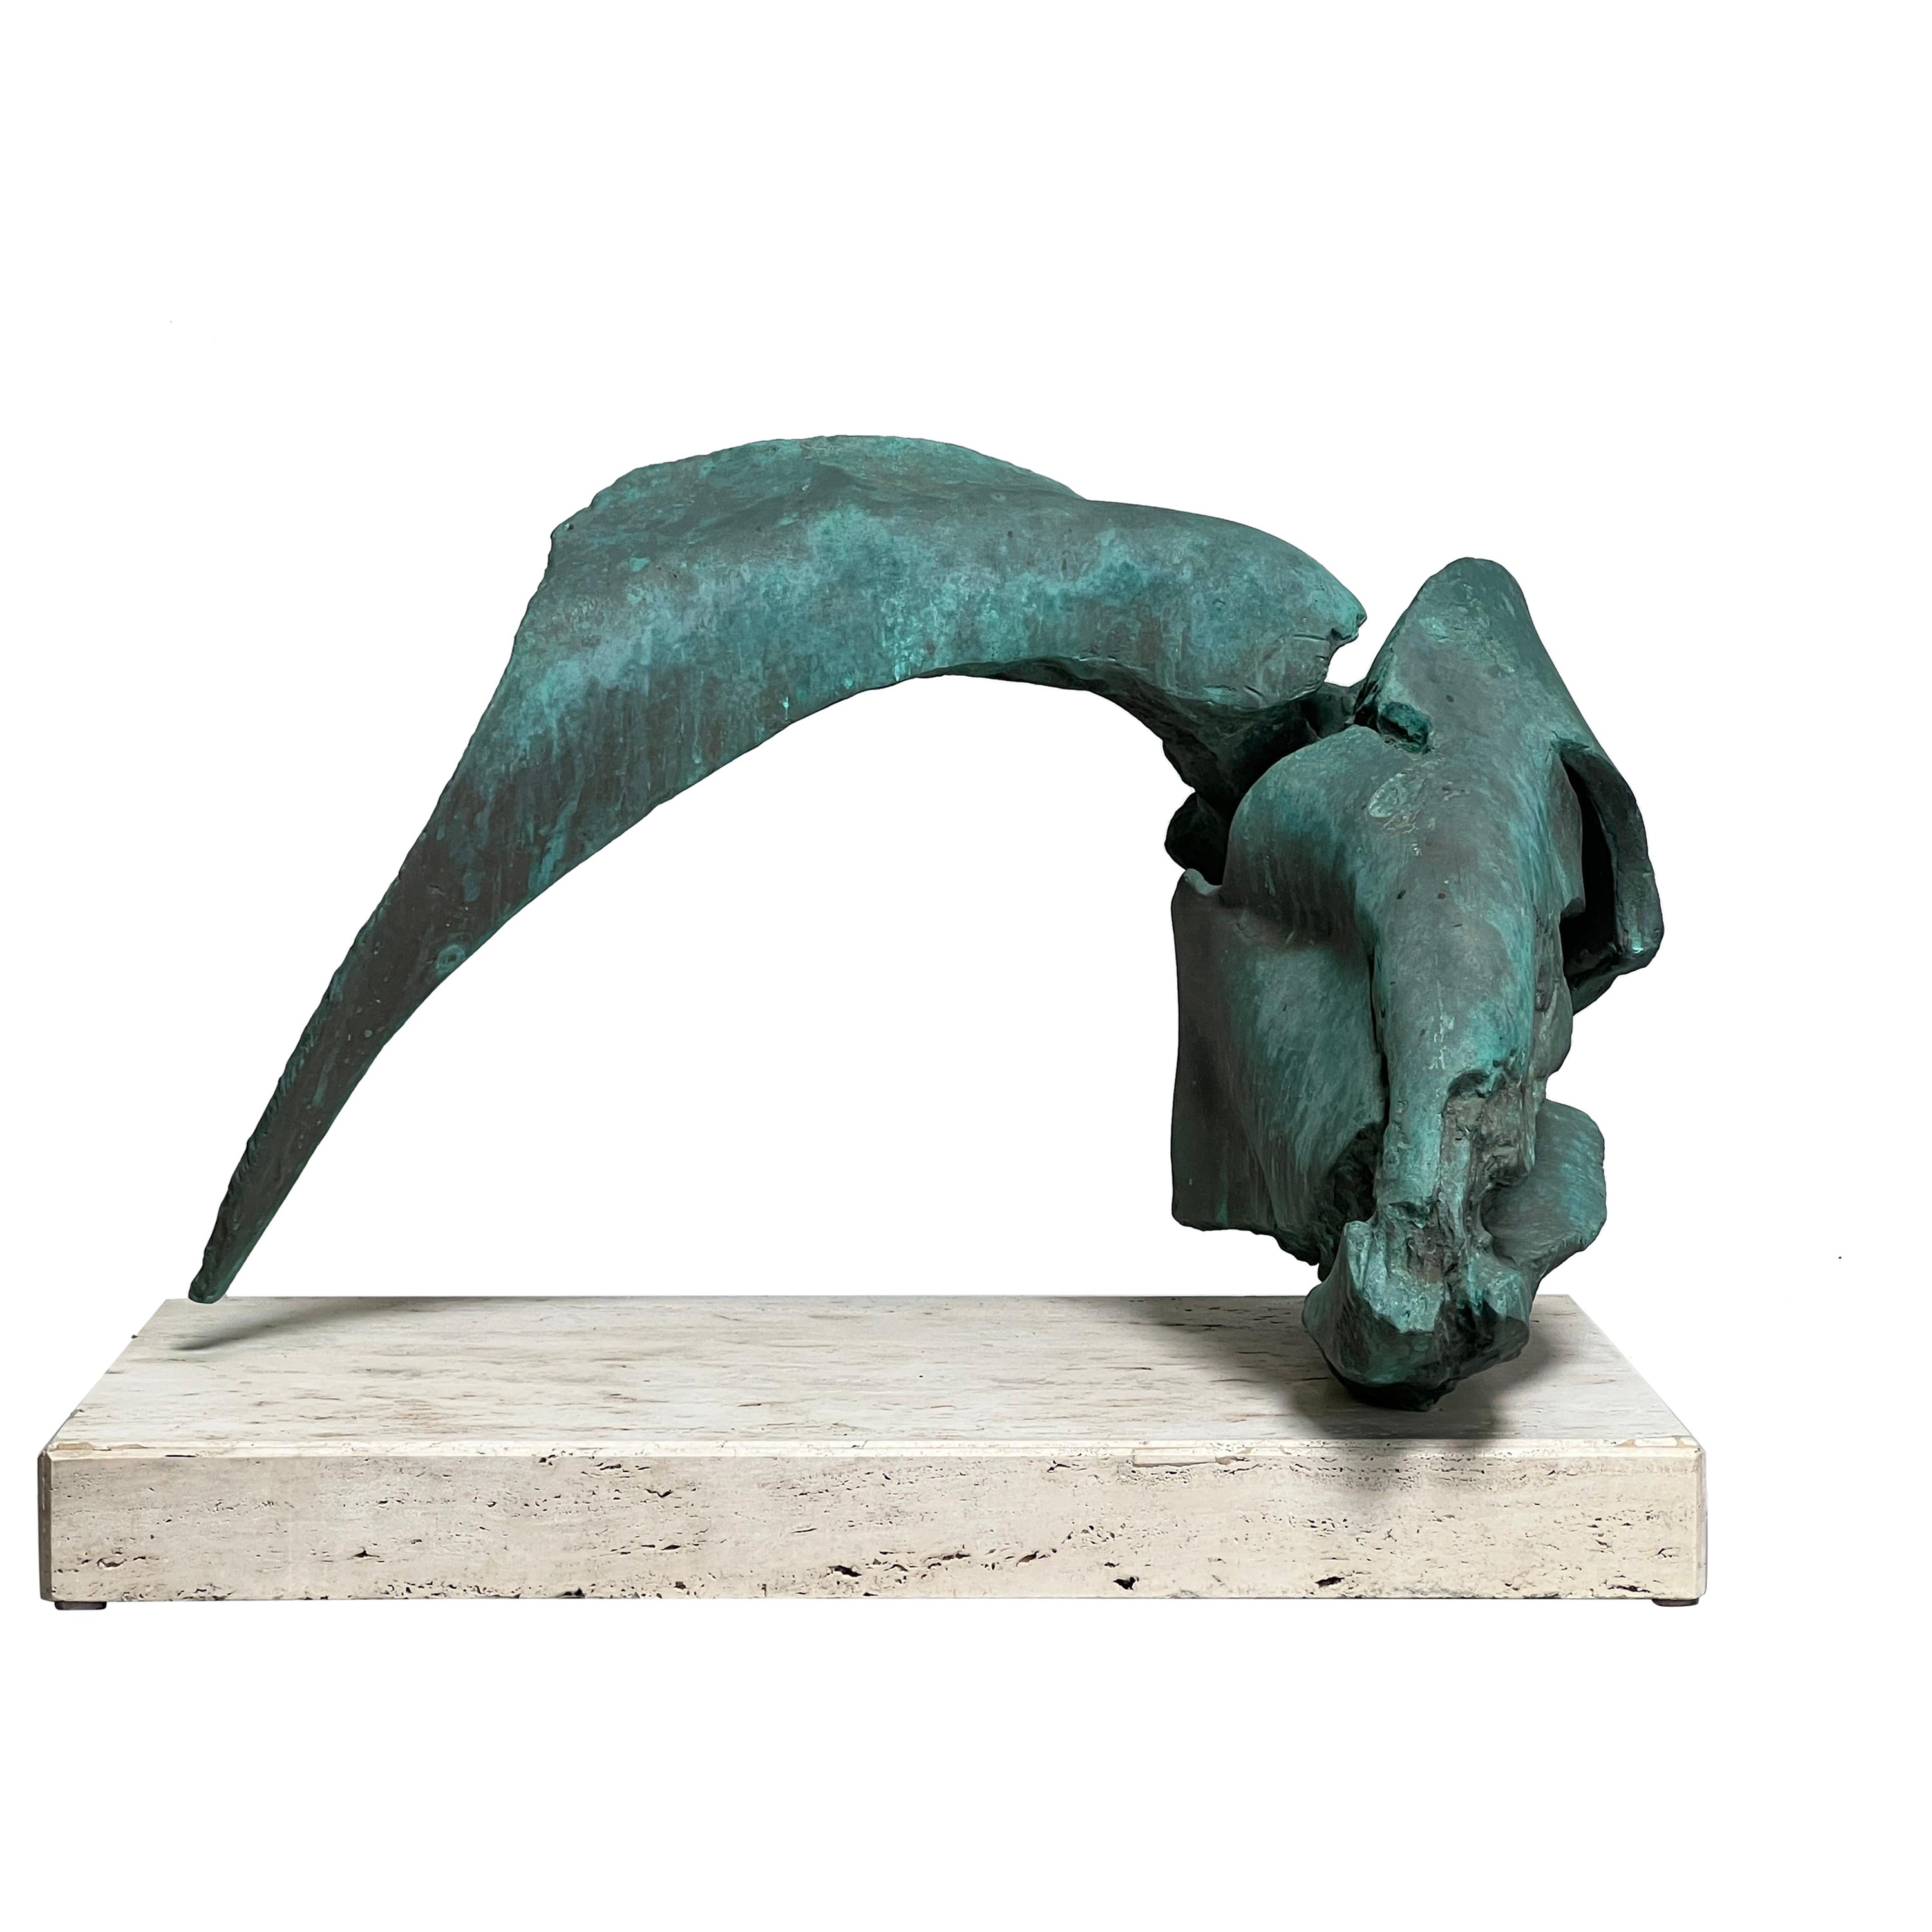 Scull and Horn, bronze sculpture by Jack Zajac